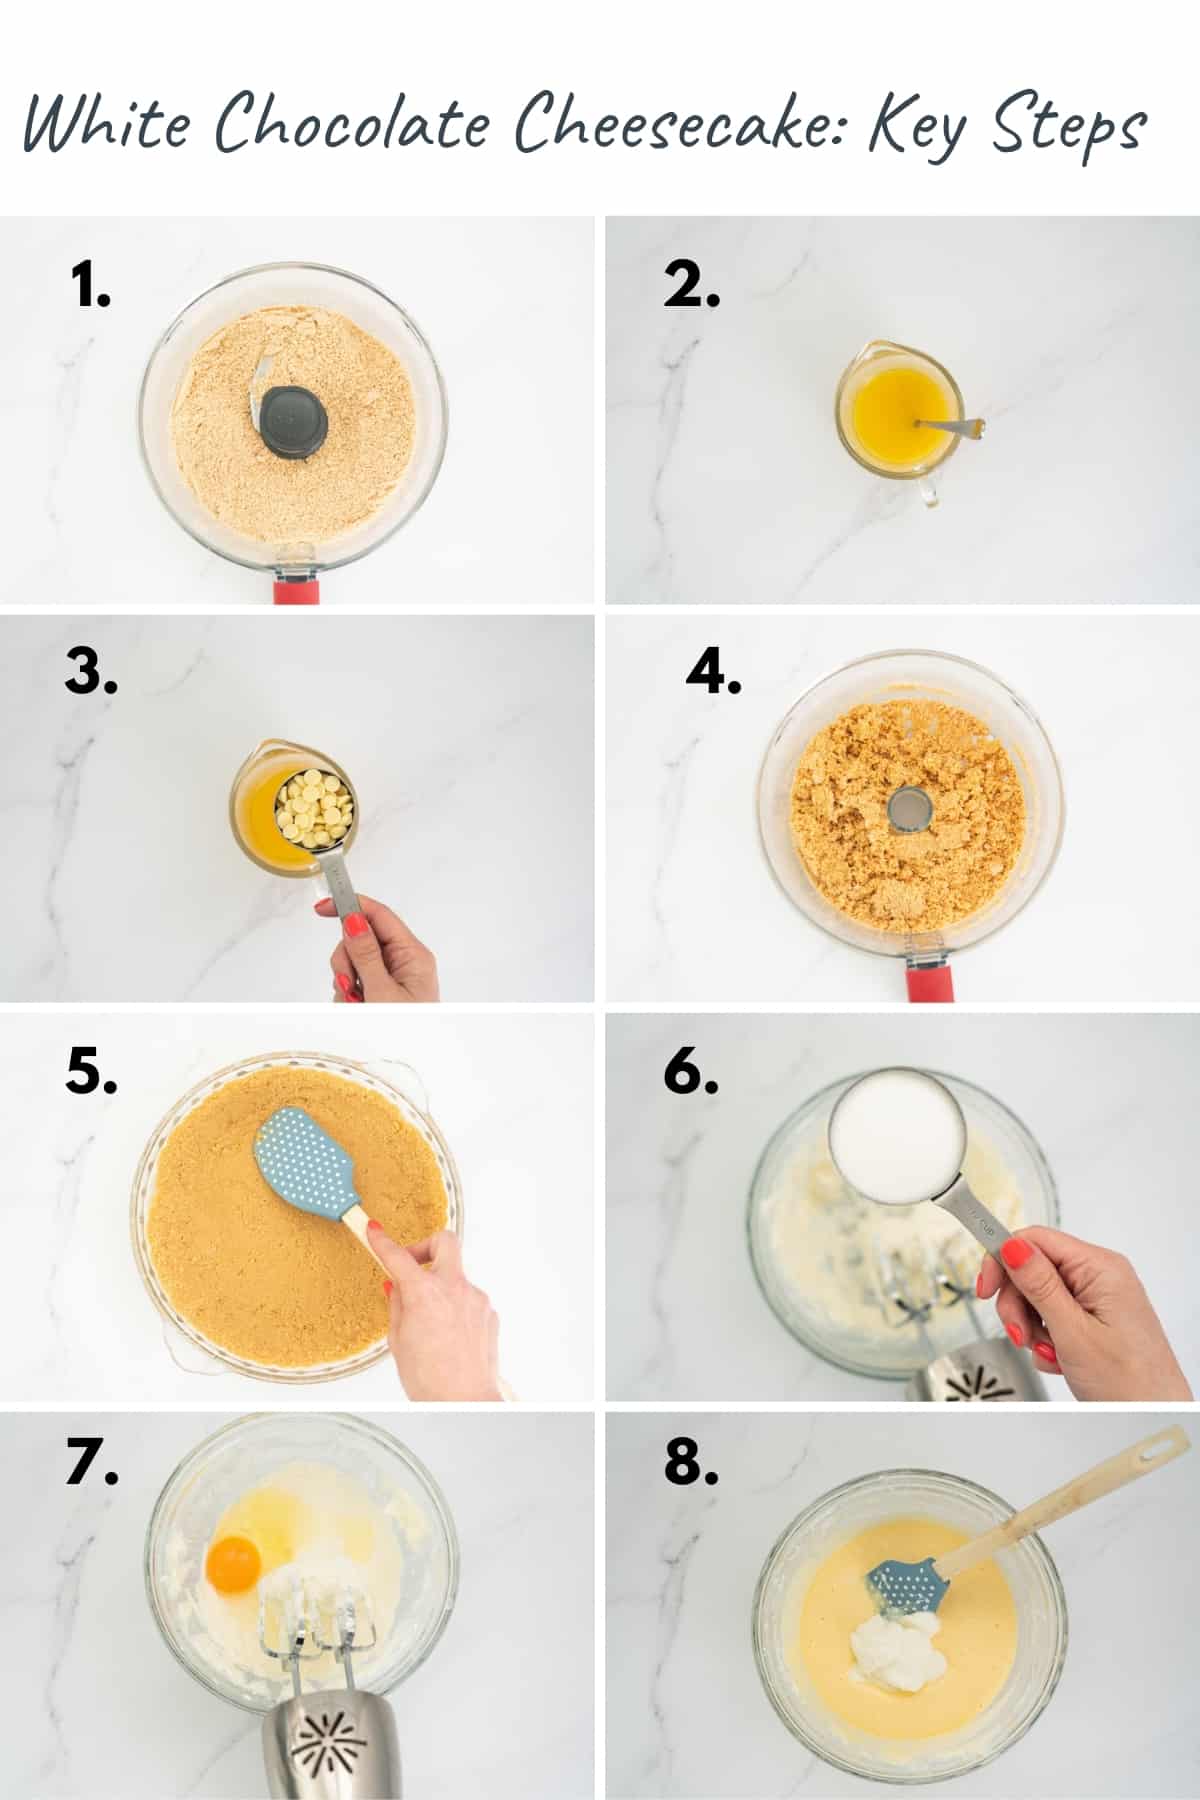 8 photo collage showing the key steps to making white chocolate cheesecake. Steps 1-8.